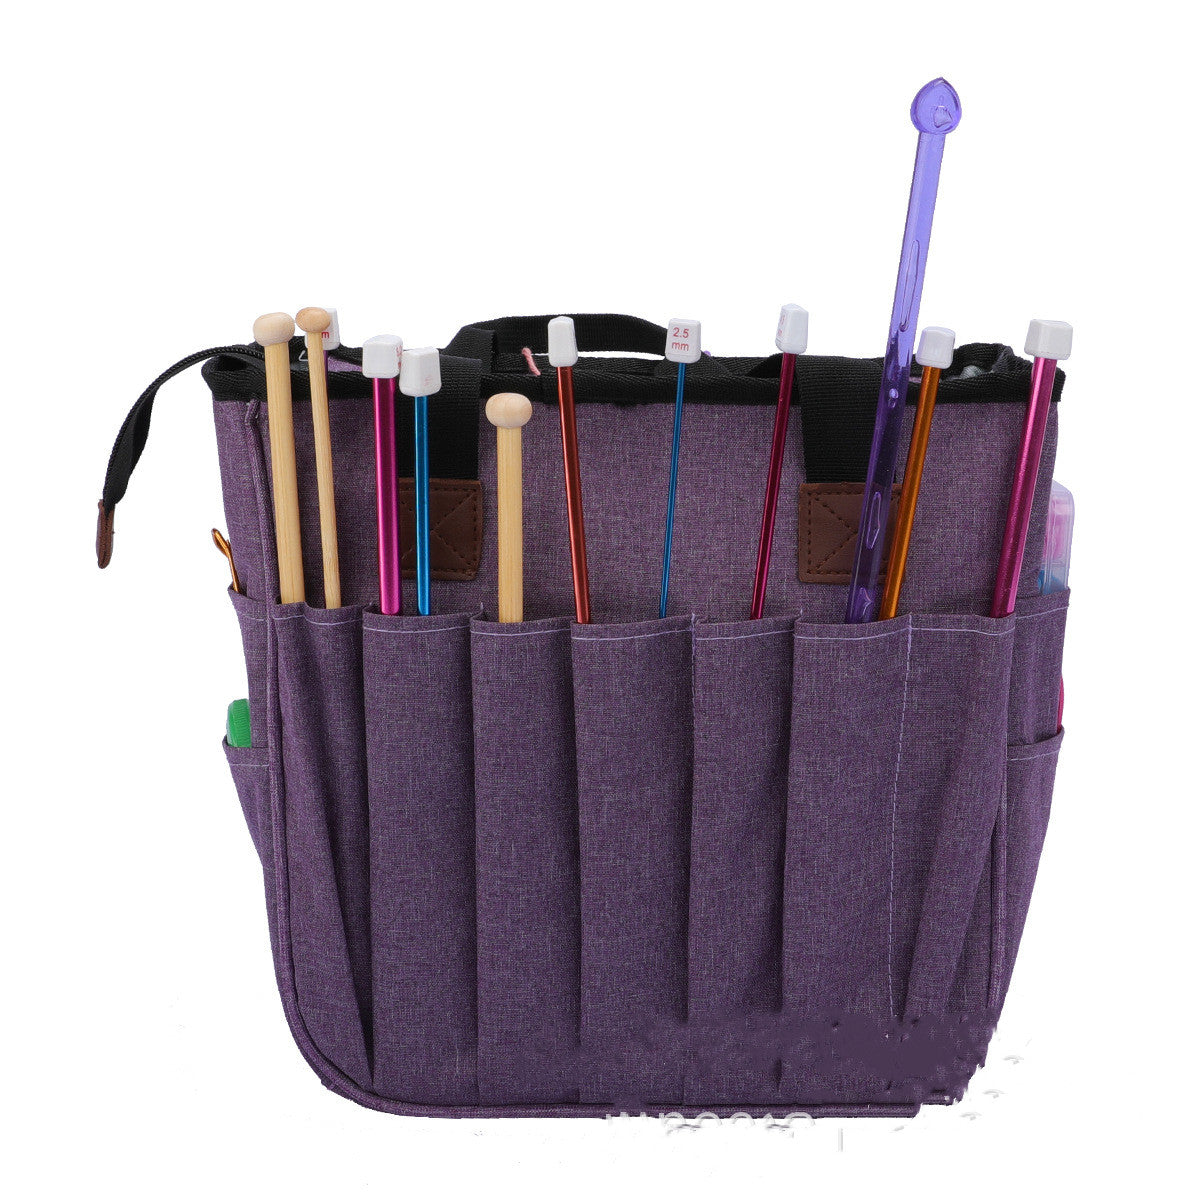 Project Bags For Crochet Knitting